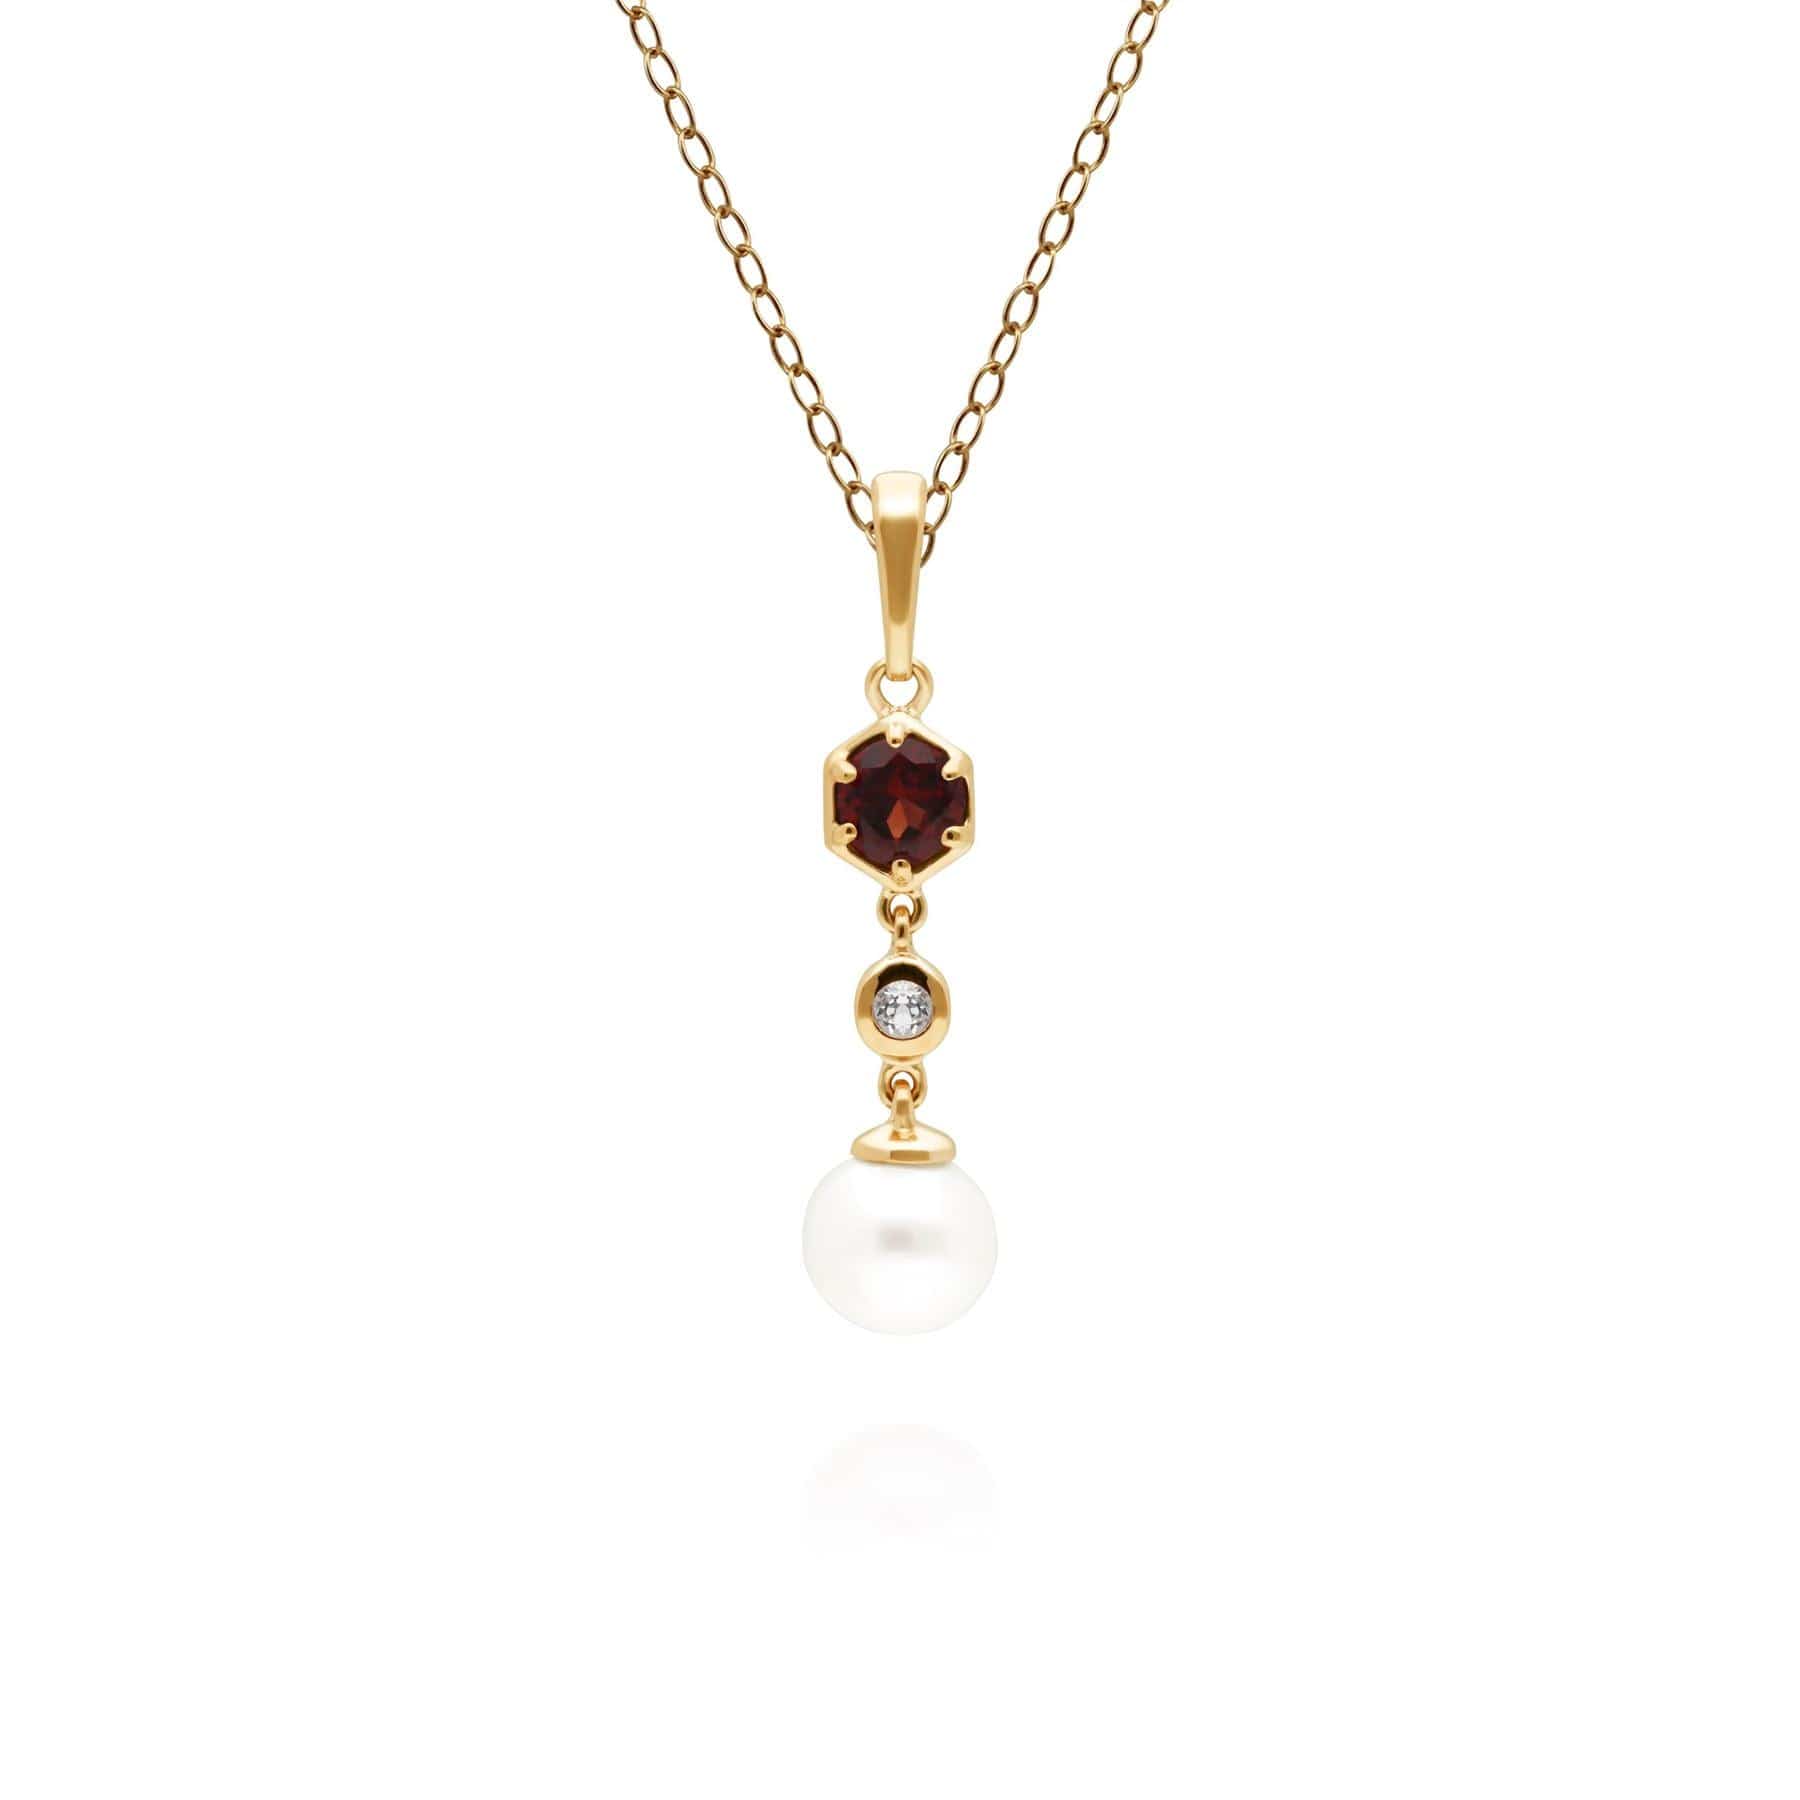 Photos - Pendant / Choker Necklace Modern Pearl, Garnet & Topaz Drop Pendant in Gold Plated Sterling Silver